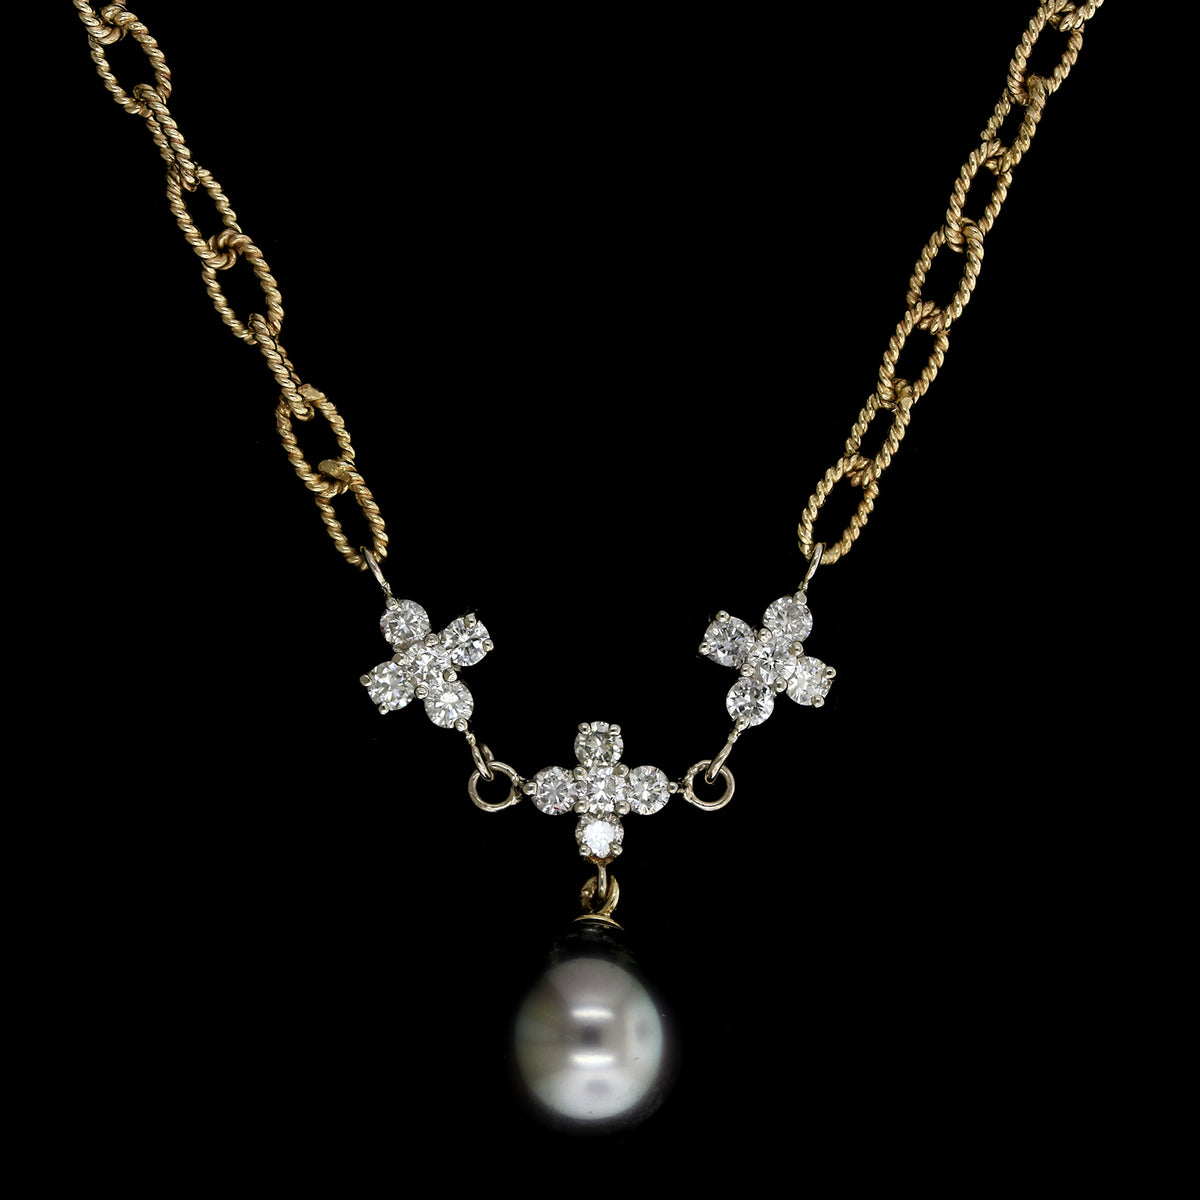 14K Yellow Gold Estate Cultured Black South Sea Pearl and Diamond Necklace